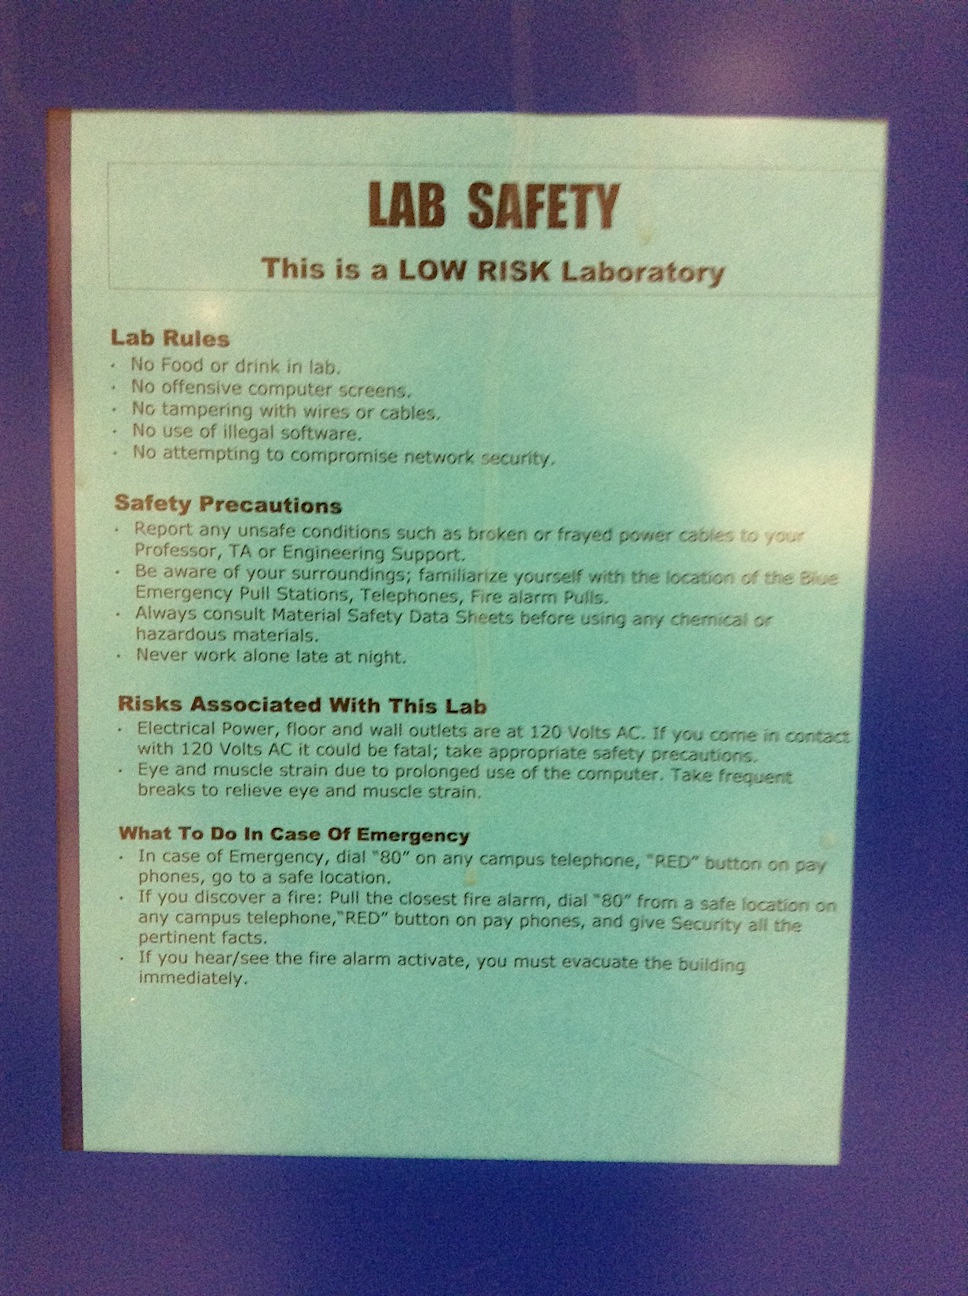 Low Risk Lab Poster image (green)